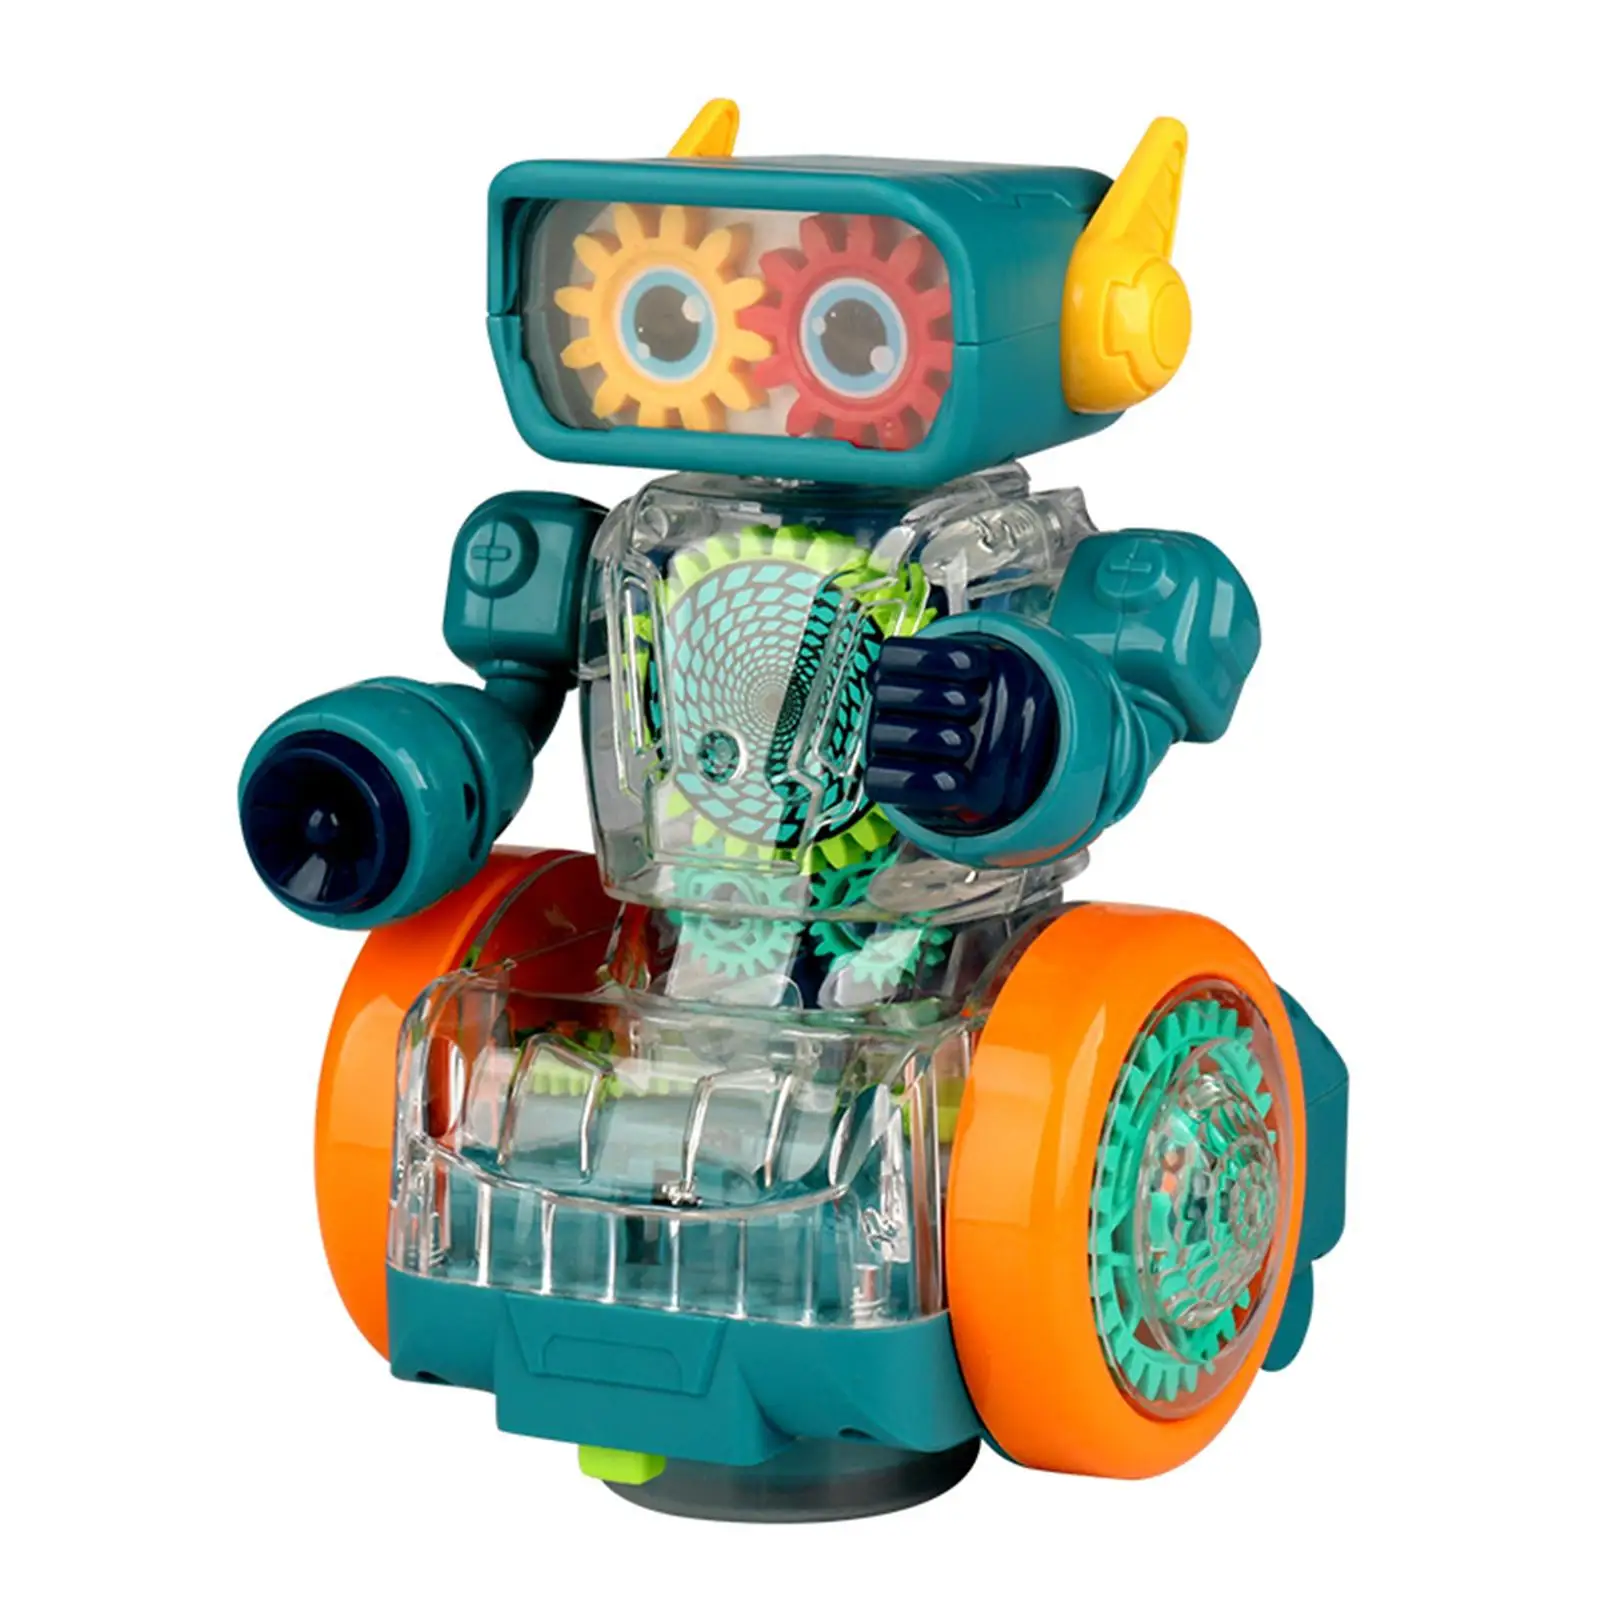 Mechanical Gear Robot Toy with Moving Gears with Music for Toddlers Children